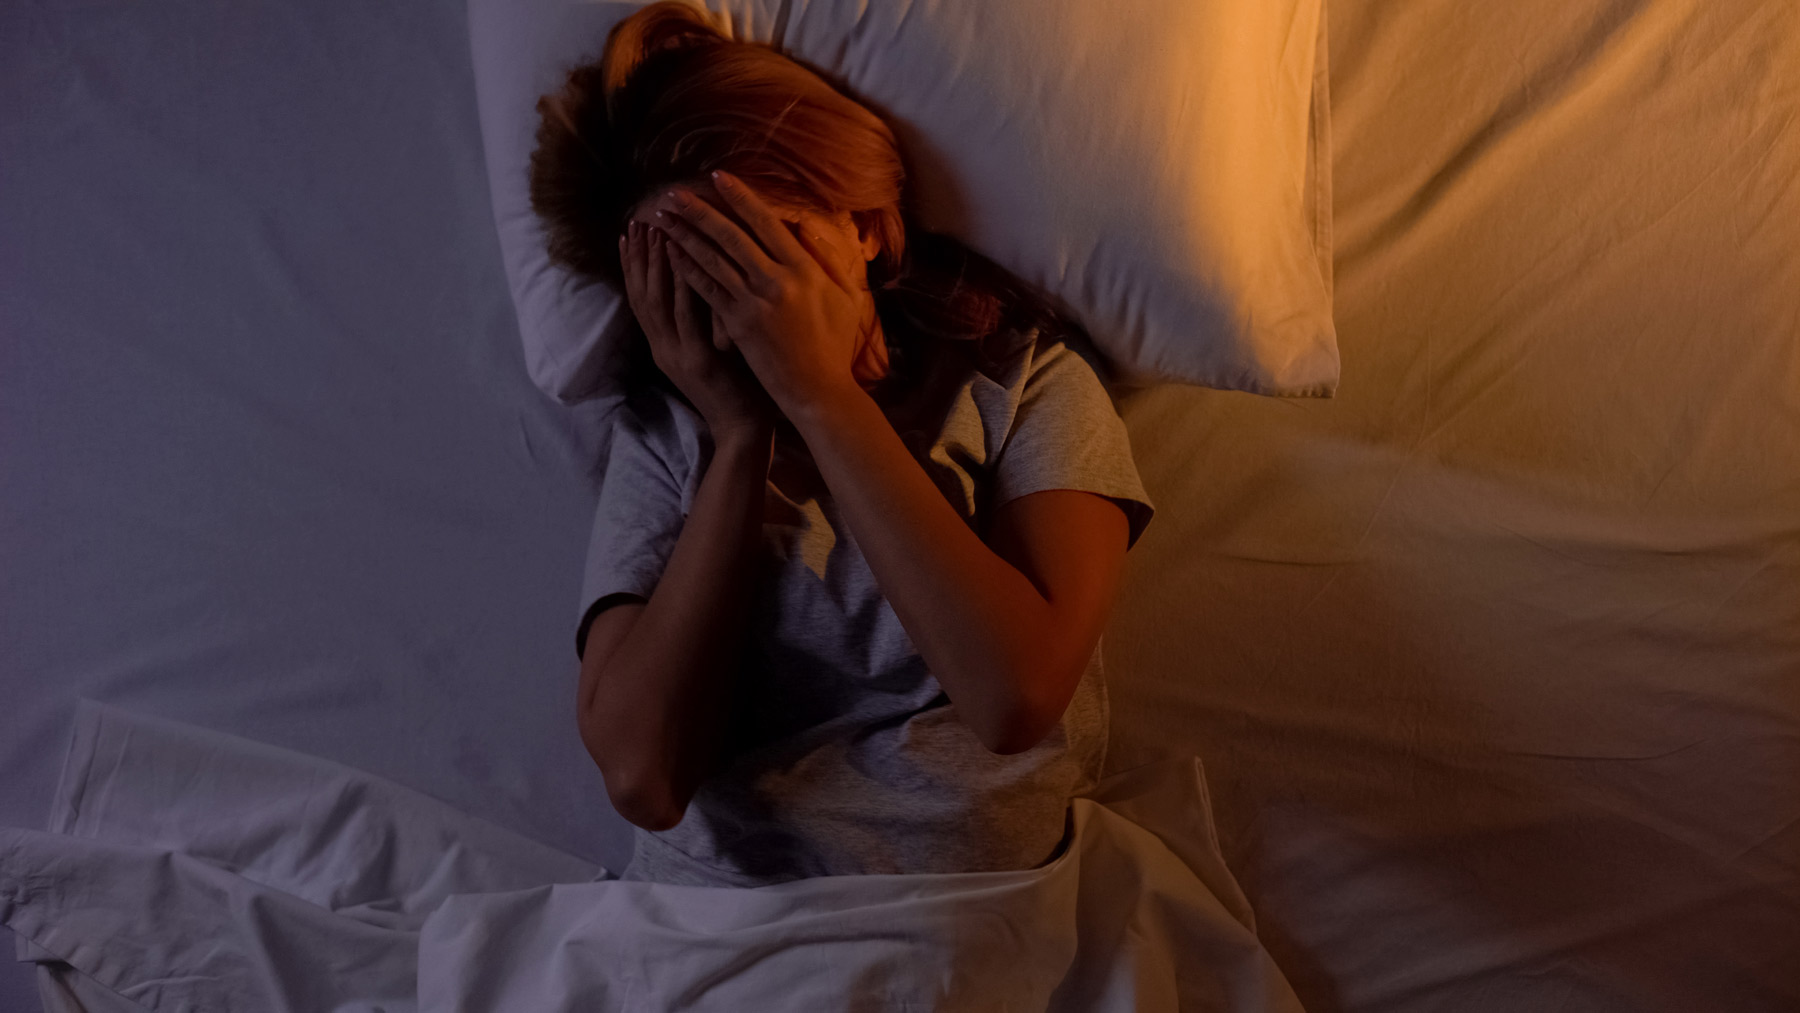 Women in bed having withdrawal symptoms from an Ambien addiction